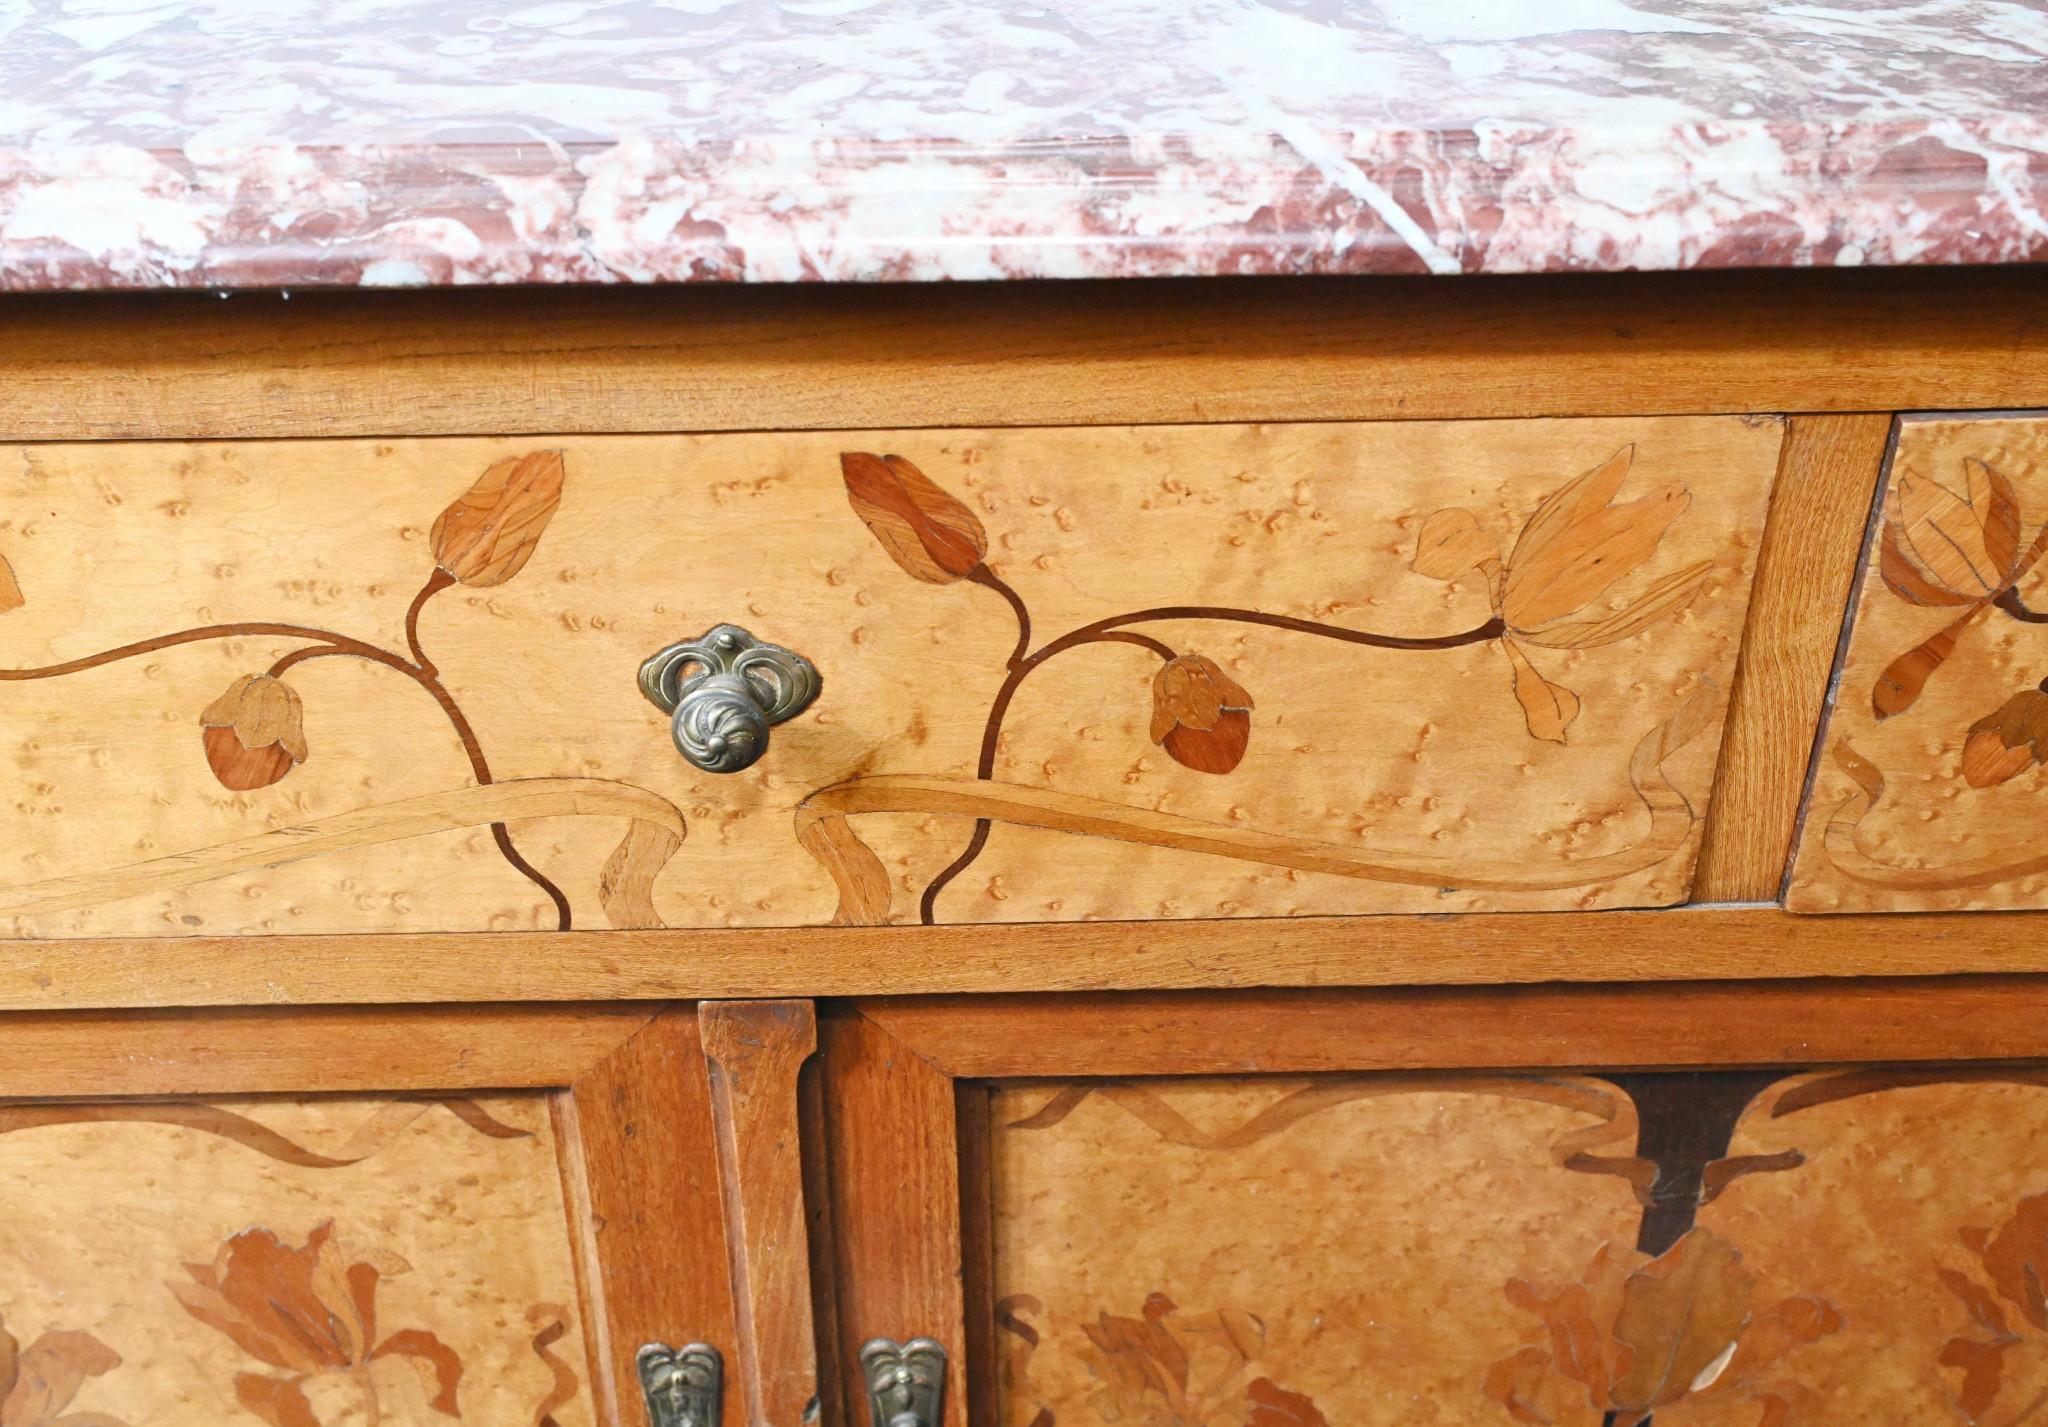 Gorgeous art nouveau commode or cabinet in blonde walnut
Features intricate inlay work showing floral motifs and designs
Comes with the coloured marble top which is smooth and chip free
Great purchase on Rue de Rossiers at Paris antiques